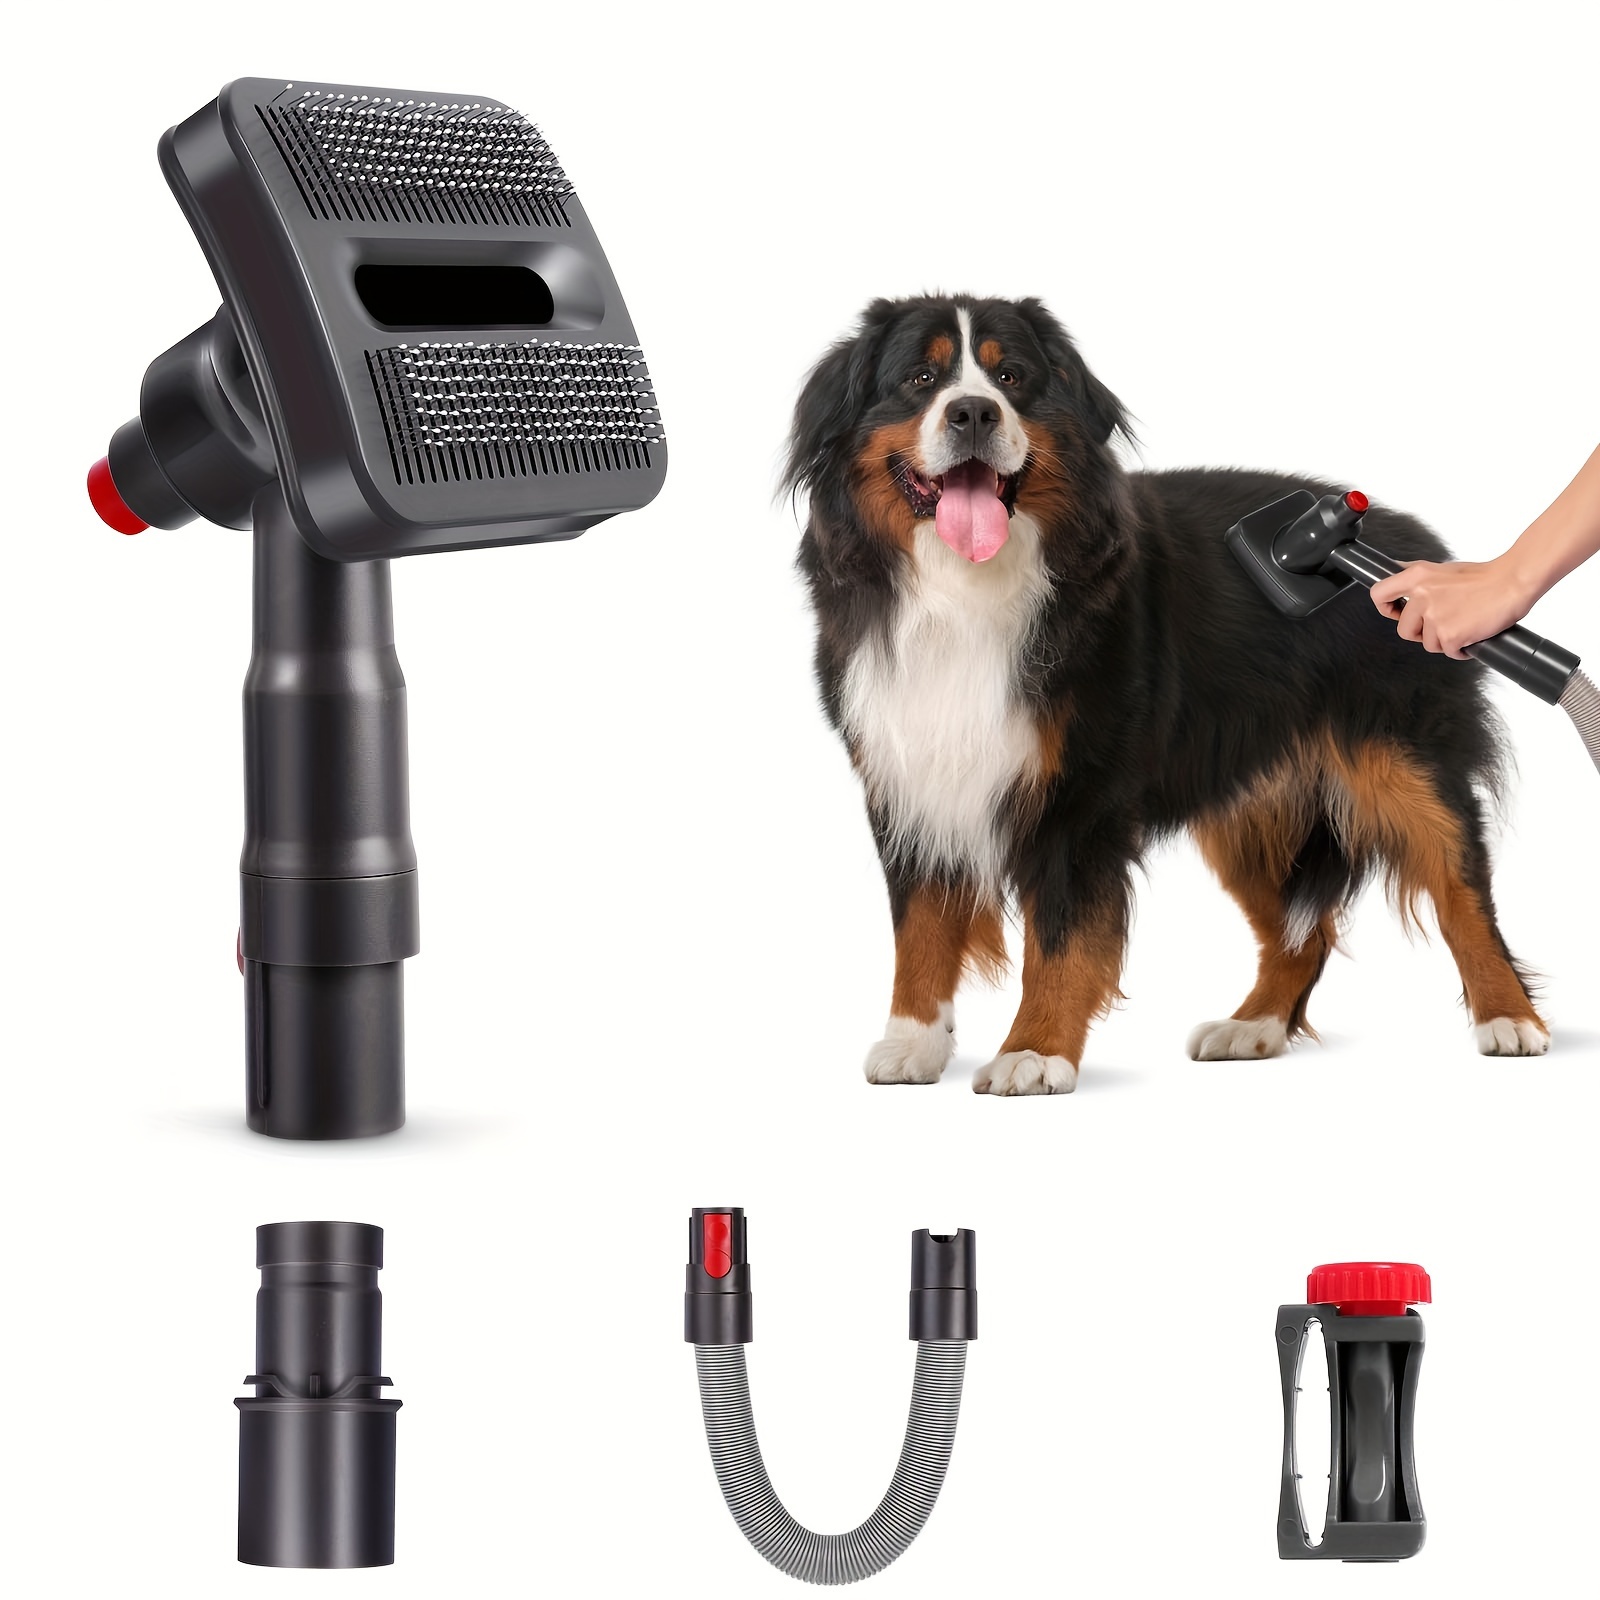 

Groom Tool Kit Compatible With Dyson Vacuums, Pet Dog Hair Brush Vacuum Attachment For V6/7/8/10/11/15, Vacuum-assisted Dog Groomer Mess-free Grooming Self-cleaning, Suitable For Medium-long Hair Dog